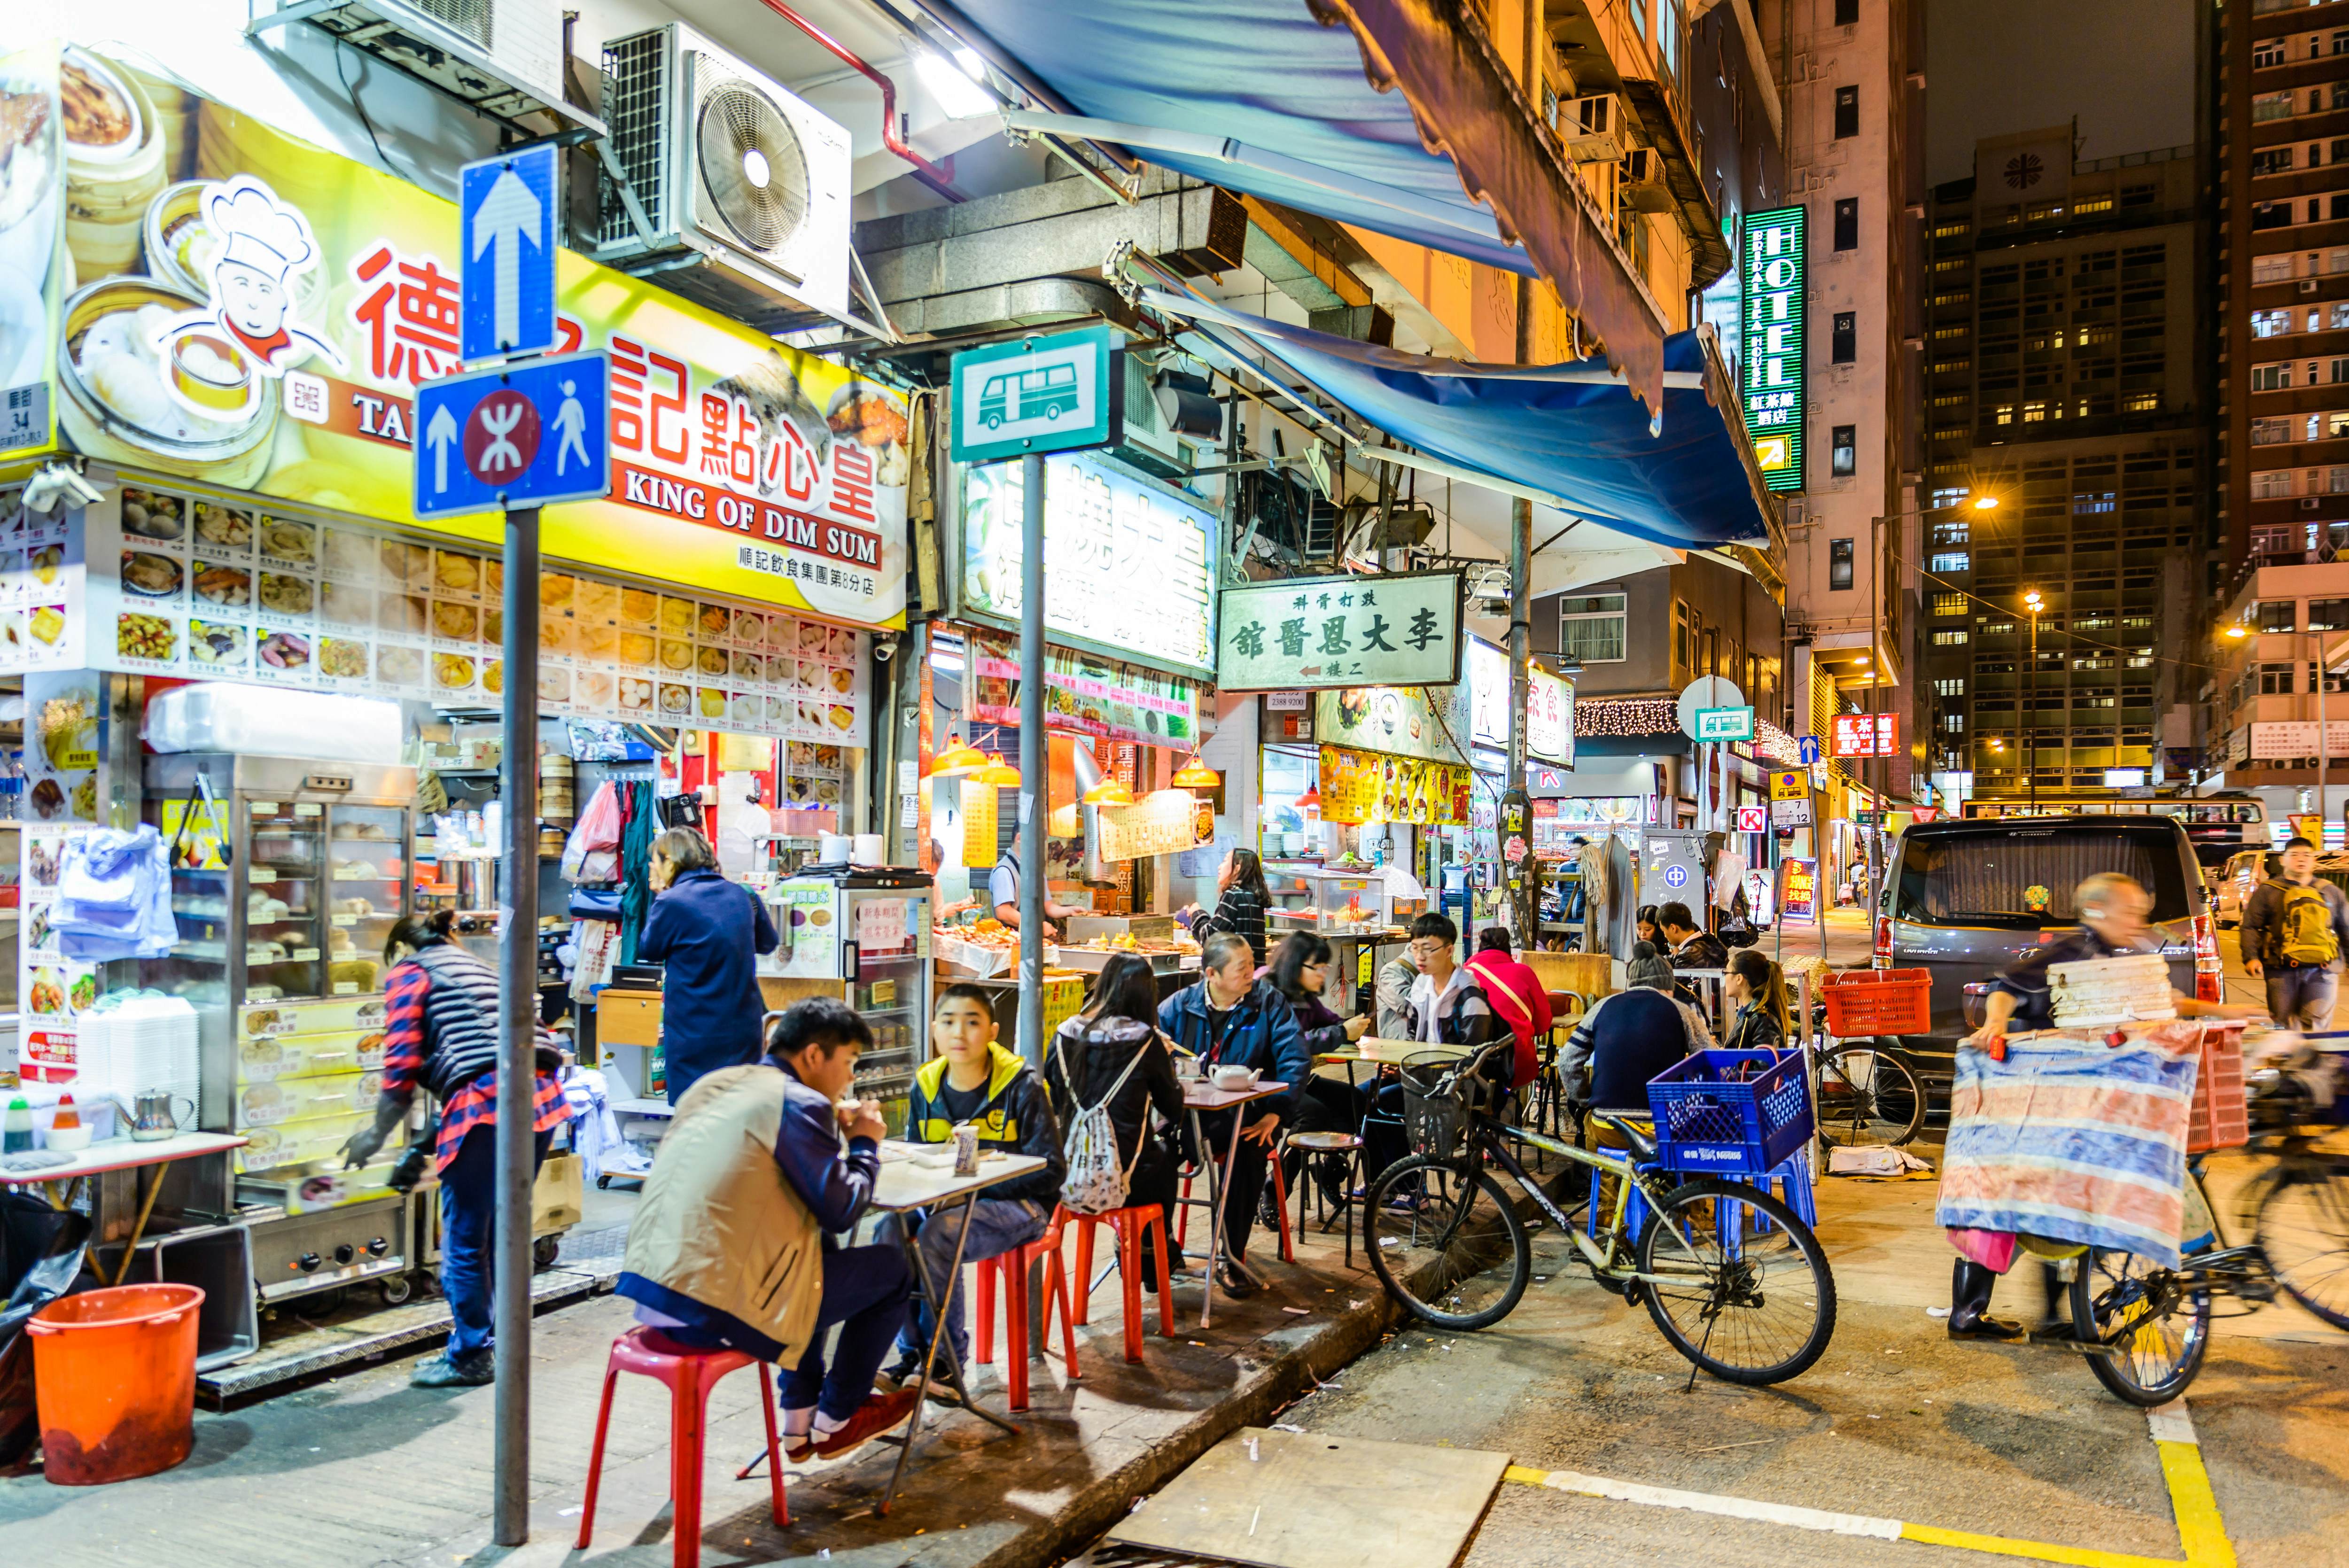 A journey through Hong Kong: Explore the city's top cultural and